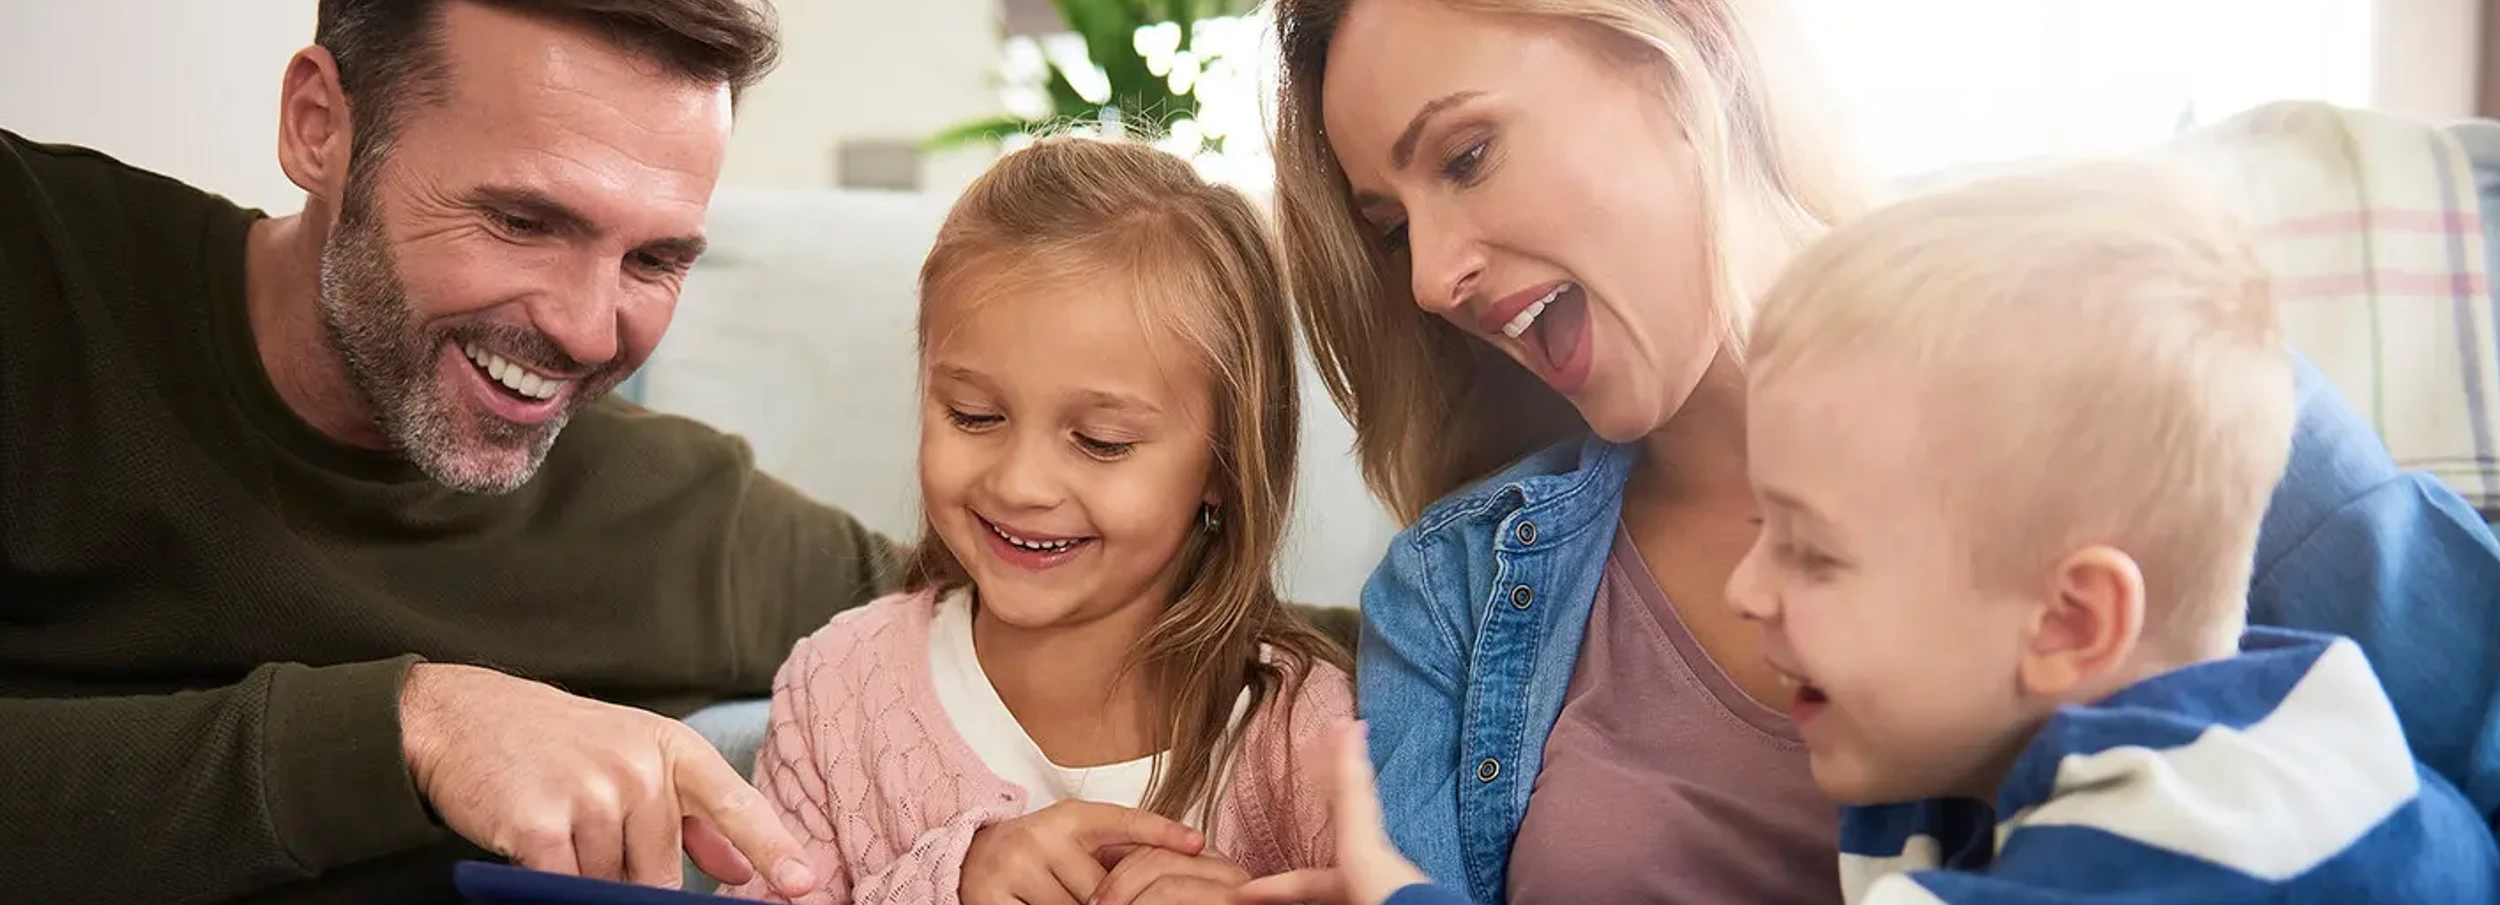 Happy family of four laughing at something on a tablet.